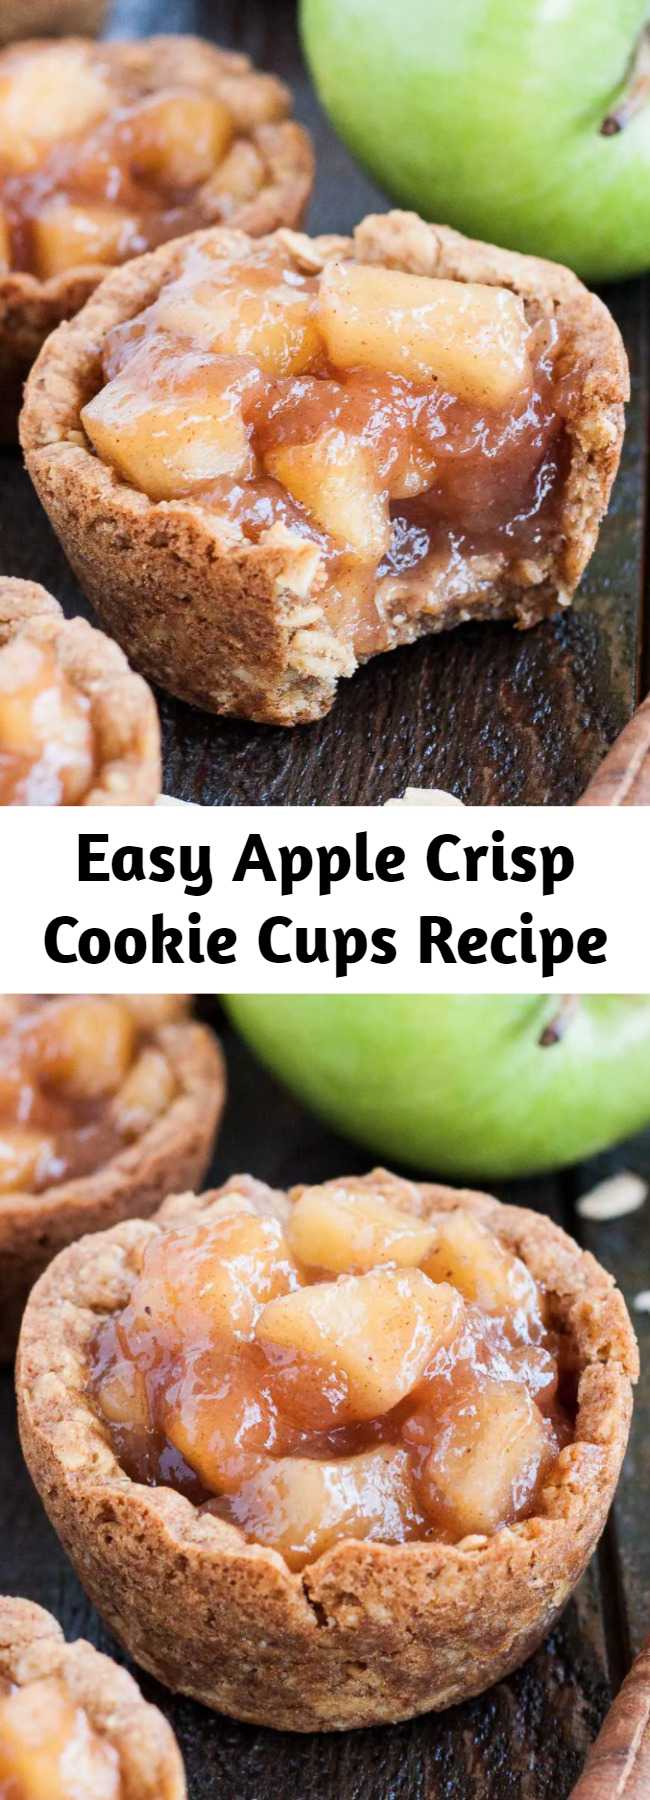 Easy Apple Crisp Cookie Cups Recipe - These Apple Crisp Cookie Cups combine classic oatmeal cookies with homemade apple pie filling for the perfect comfort food.